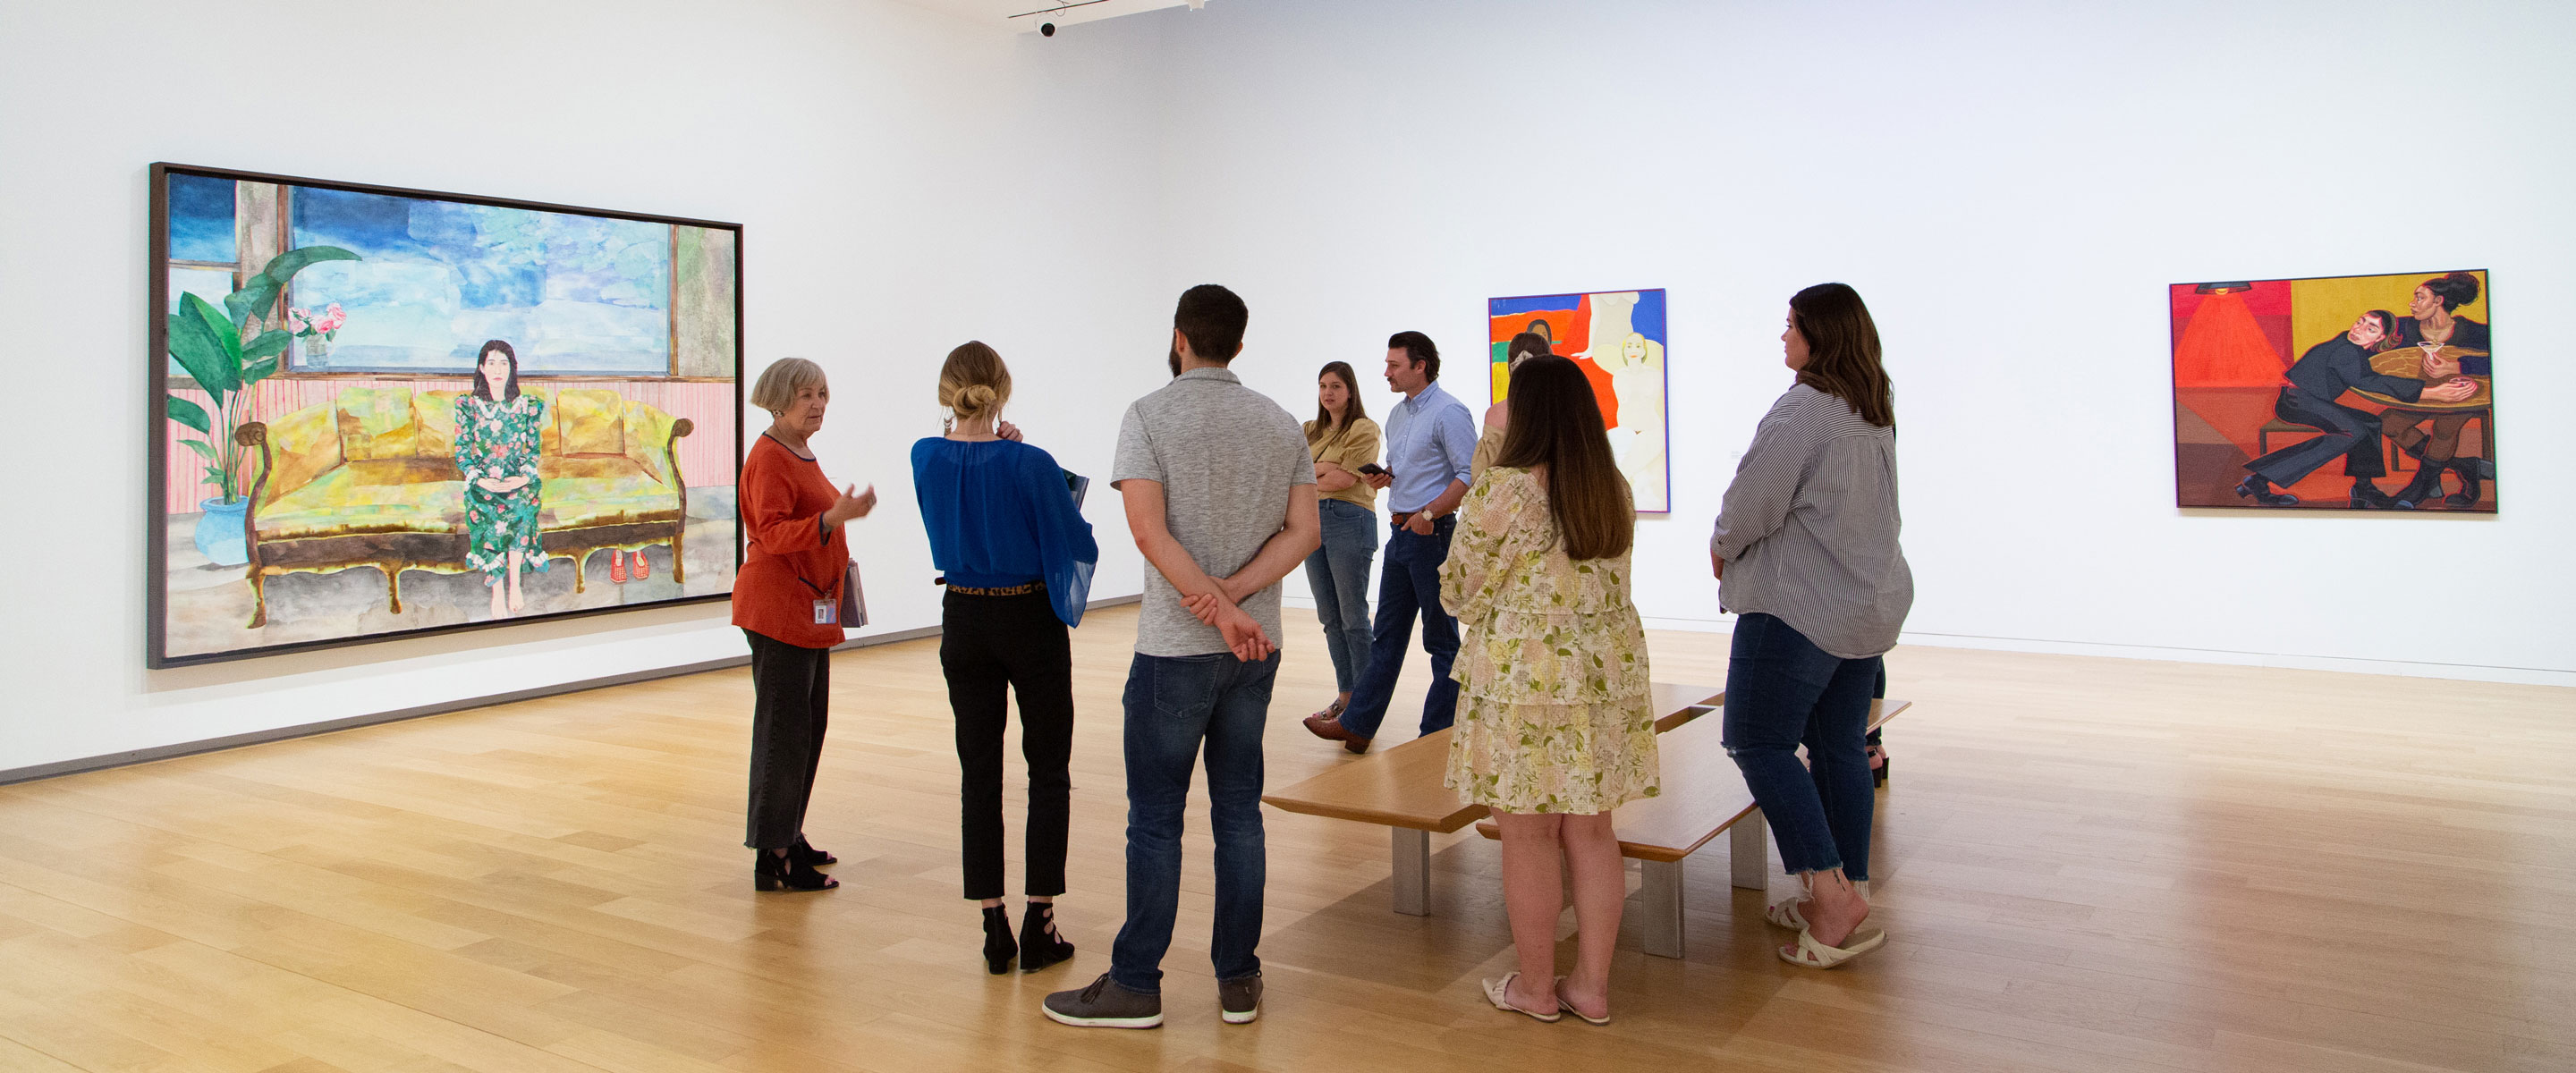 tour_group_in_moderns_galleries